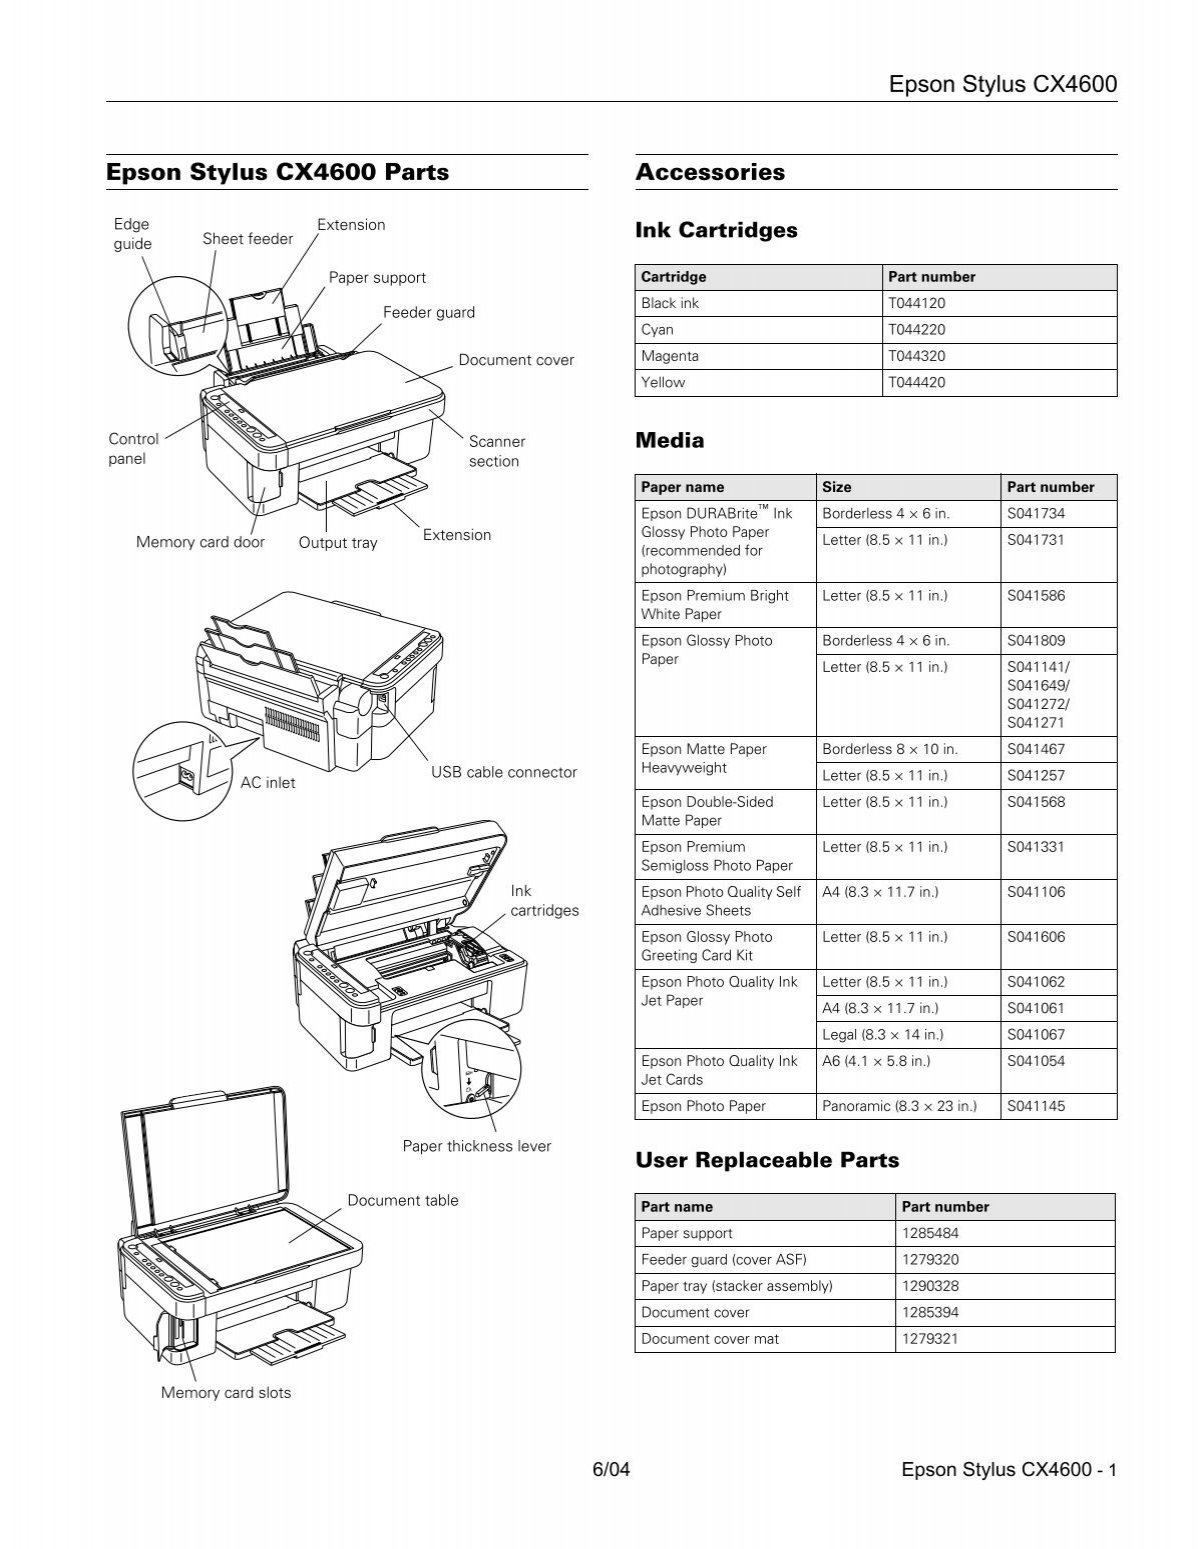 Epson Epson Stylus Cx4600 All In One Printer Product Information Guide 3694